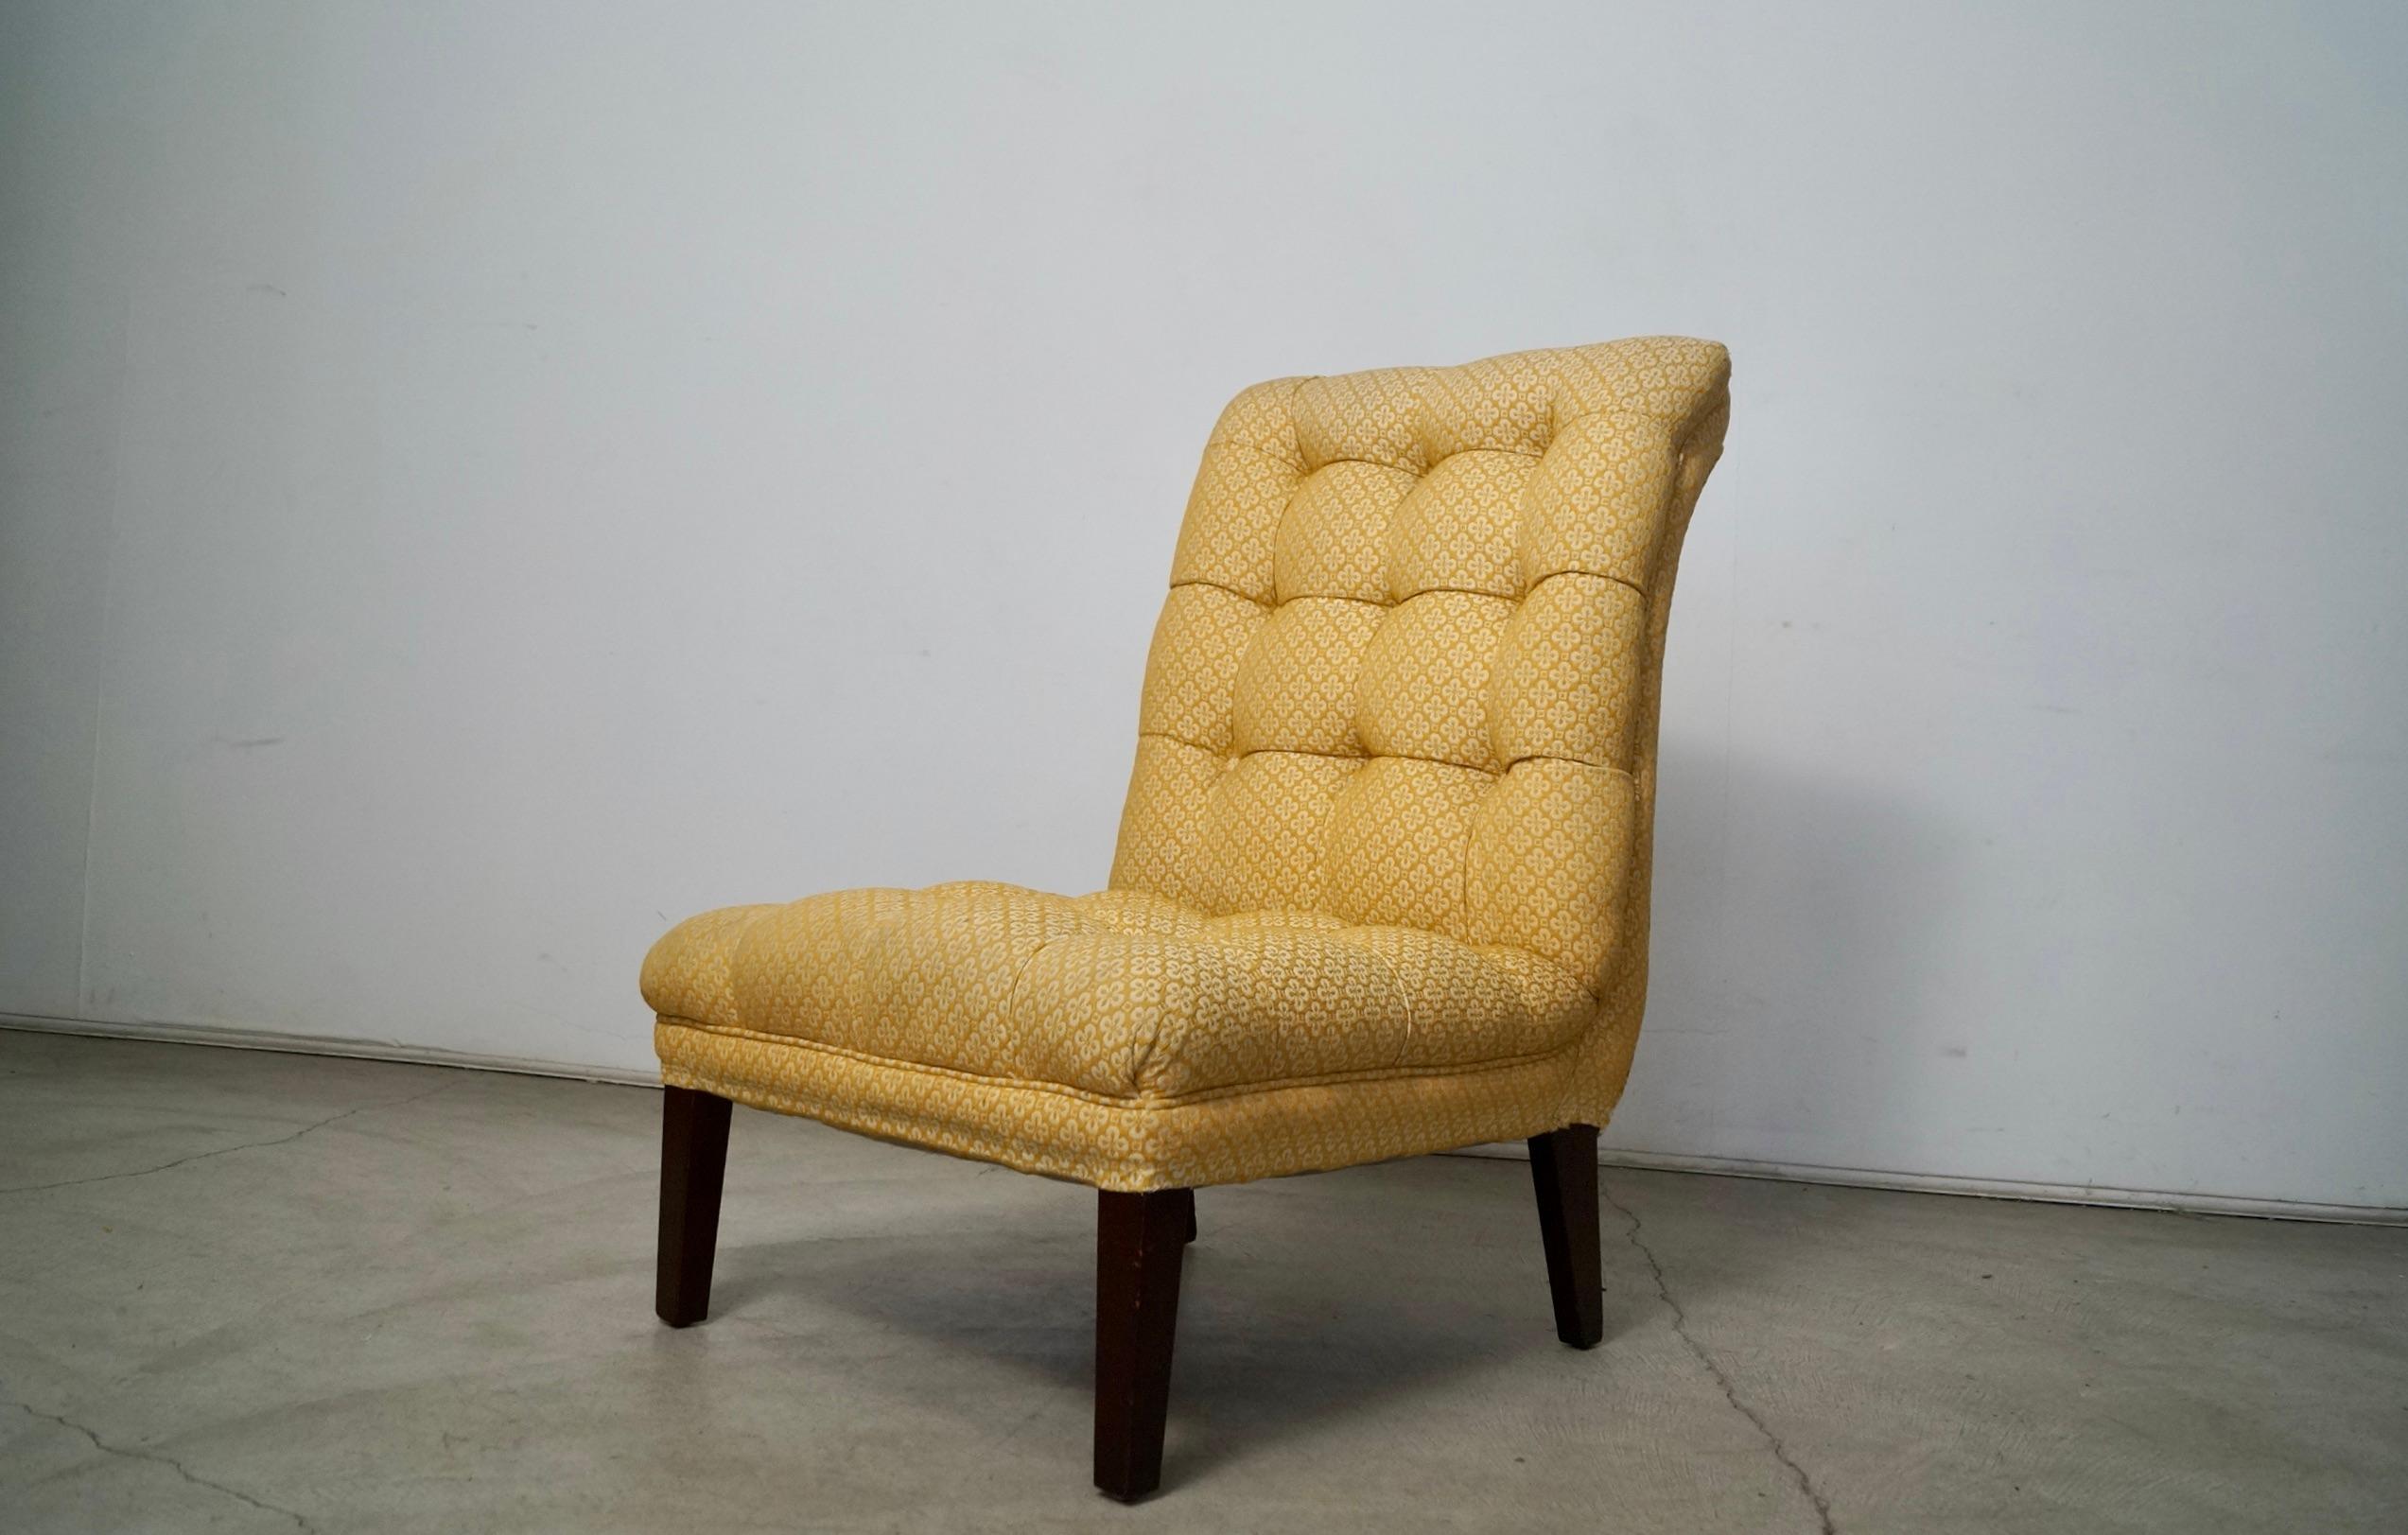 Vintage 1960's Hollywood Regency tufted slipper chair for sale. Really solid chair with a great curled scoop design, and has angled tapered legs in a walnut finish. The upholstery is in outstanding condition with no rips, tears, or stains, and has